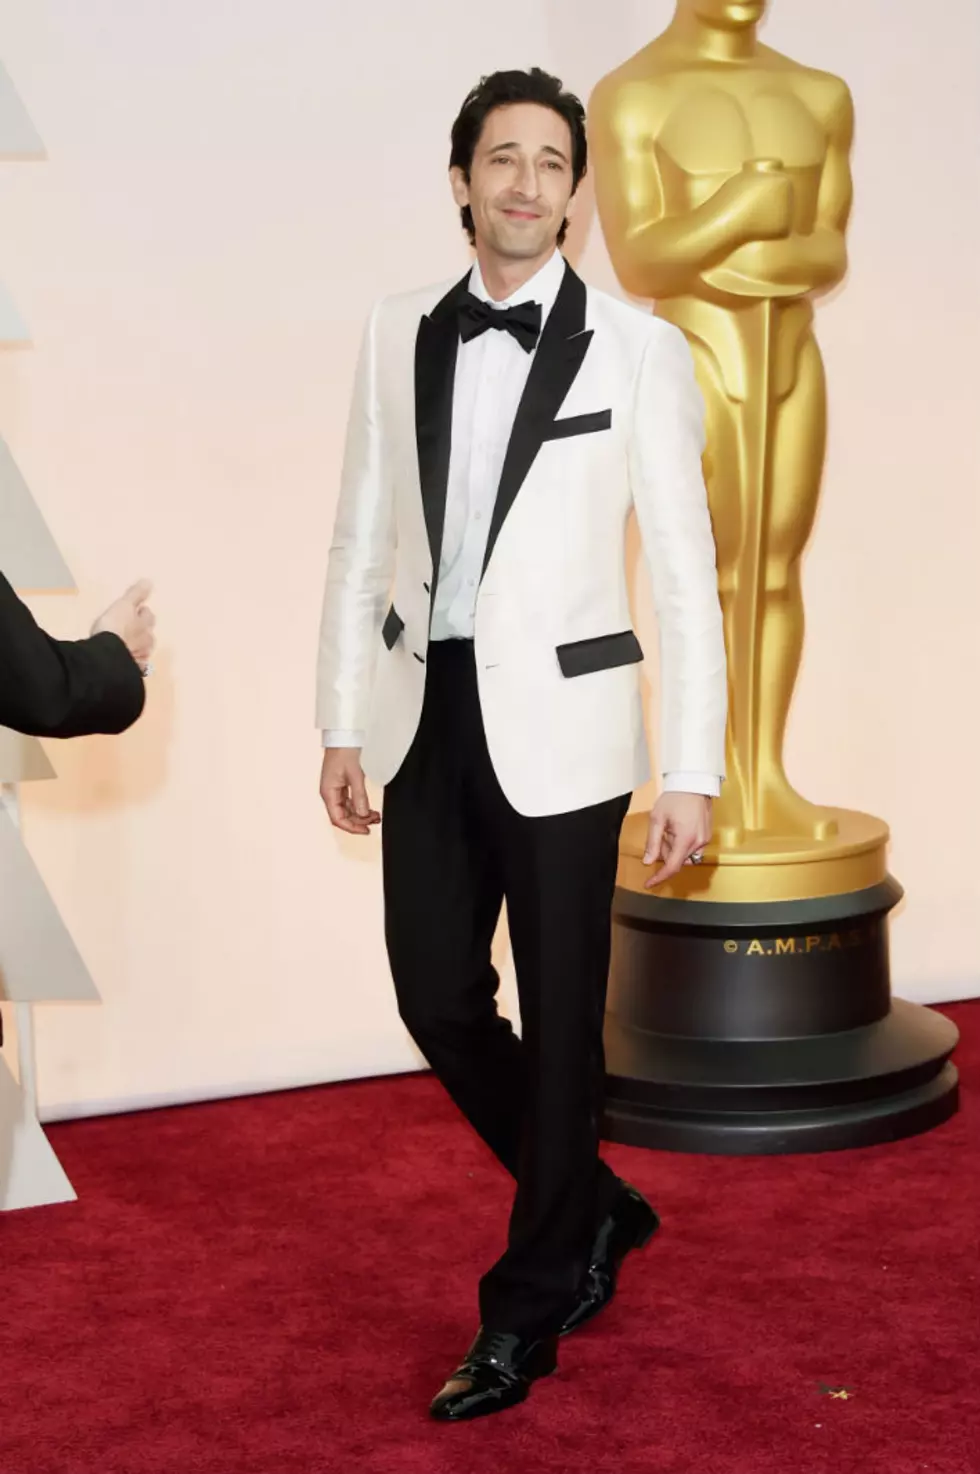 See Actors Who Rocked Nontraditional Tuxes at the 2015 Oscars [PHOTOS]